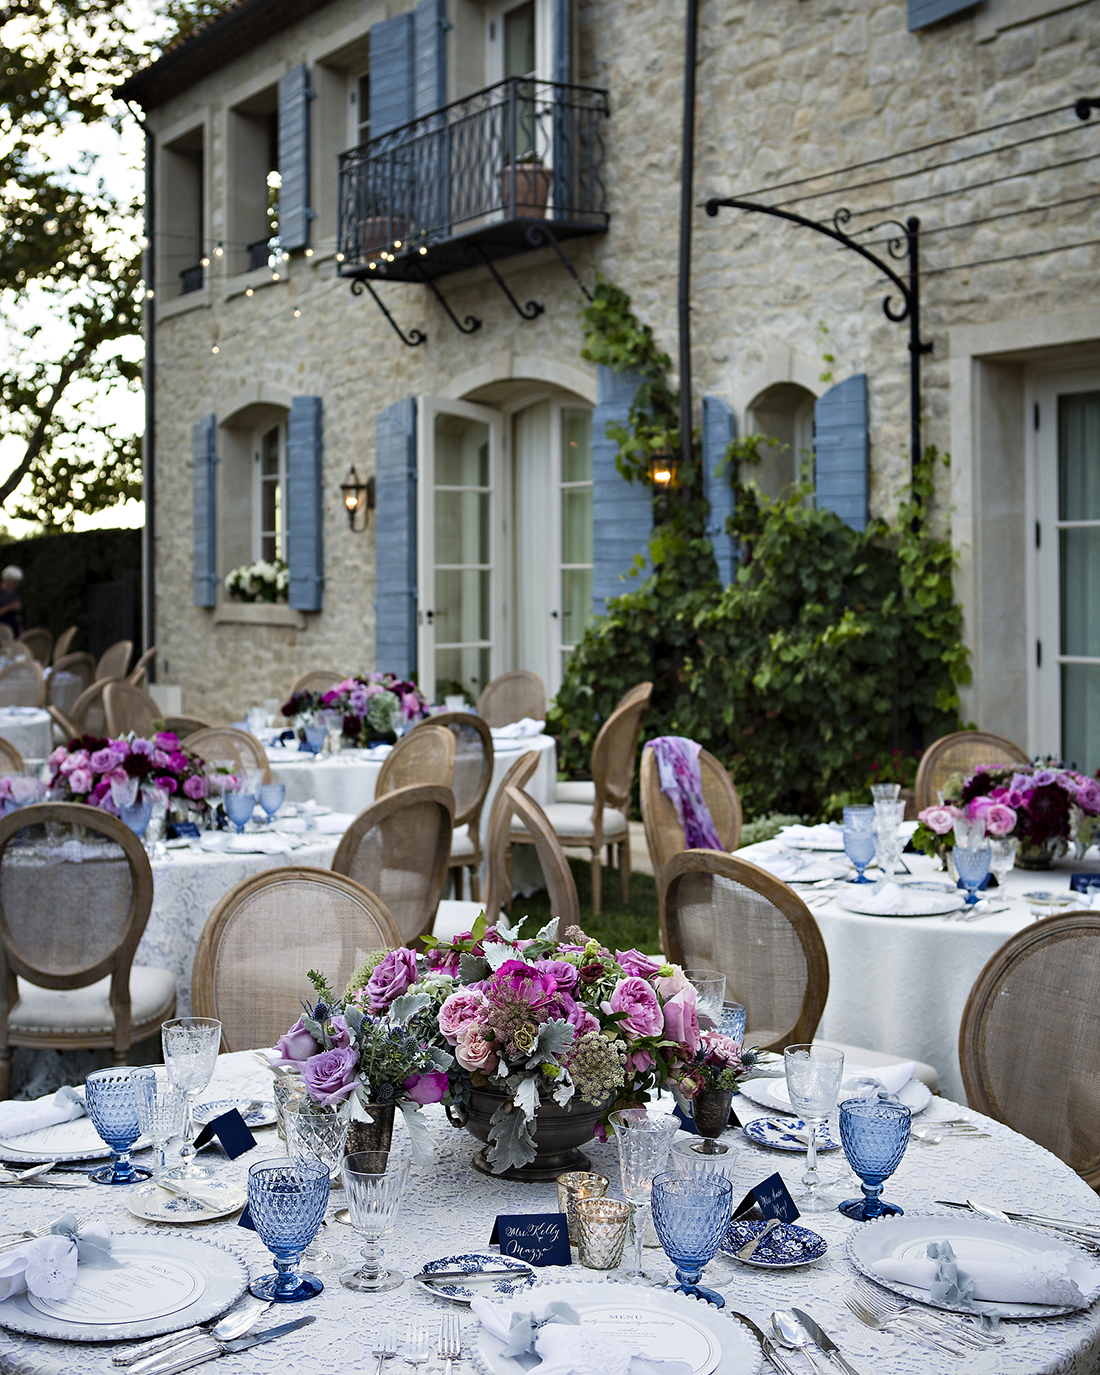 An image of a blue colored dining set up with magenta rose floral center piece